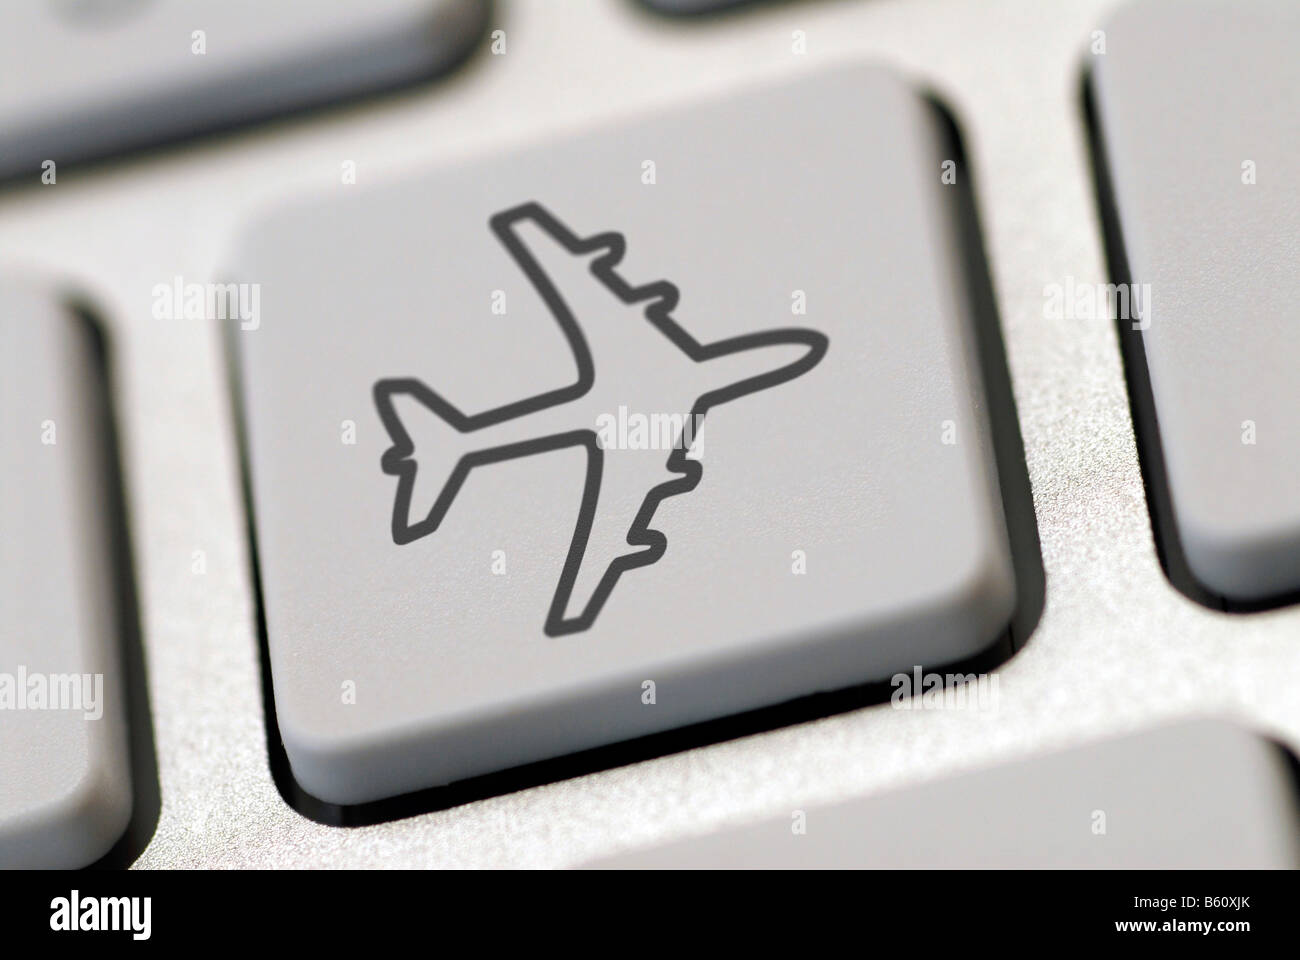 Computer keyboard with an airplane symbol, symbolic image for internet travel bookings Stock Photo